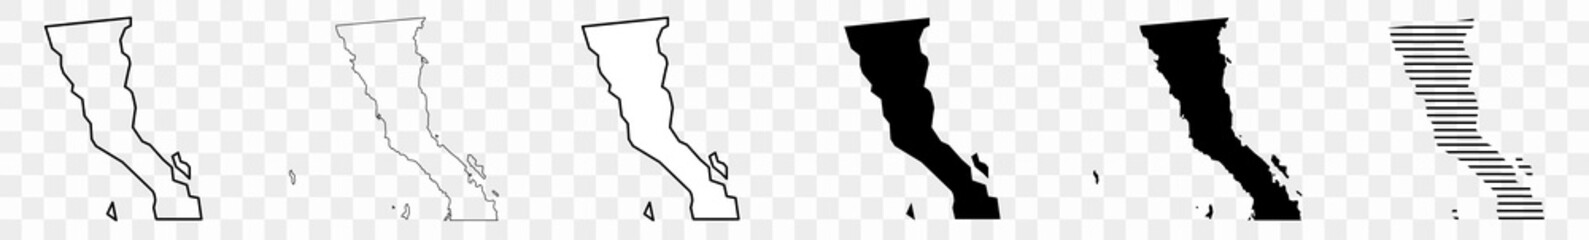 Baja California Map Black | State Border | Mexico | Mexican | Federal Entity | America | Transparent Isolated | Variations